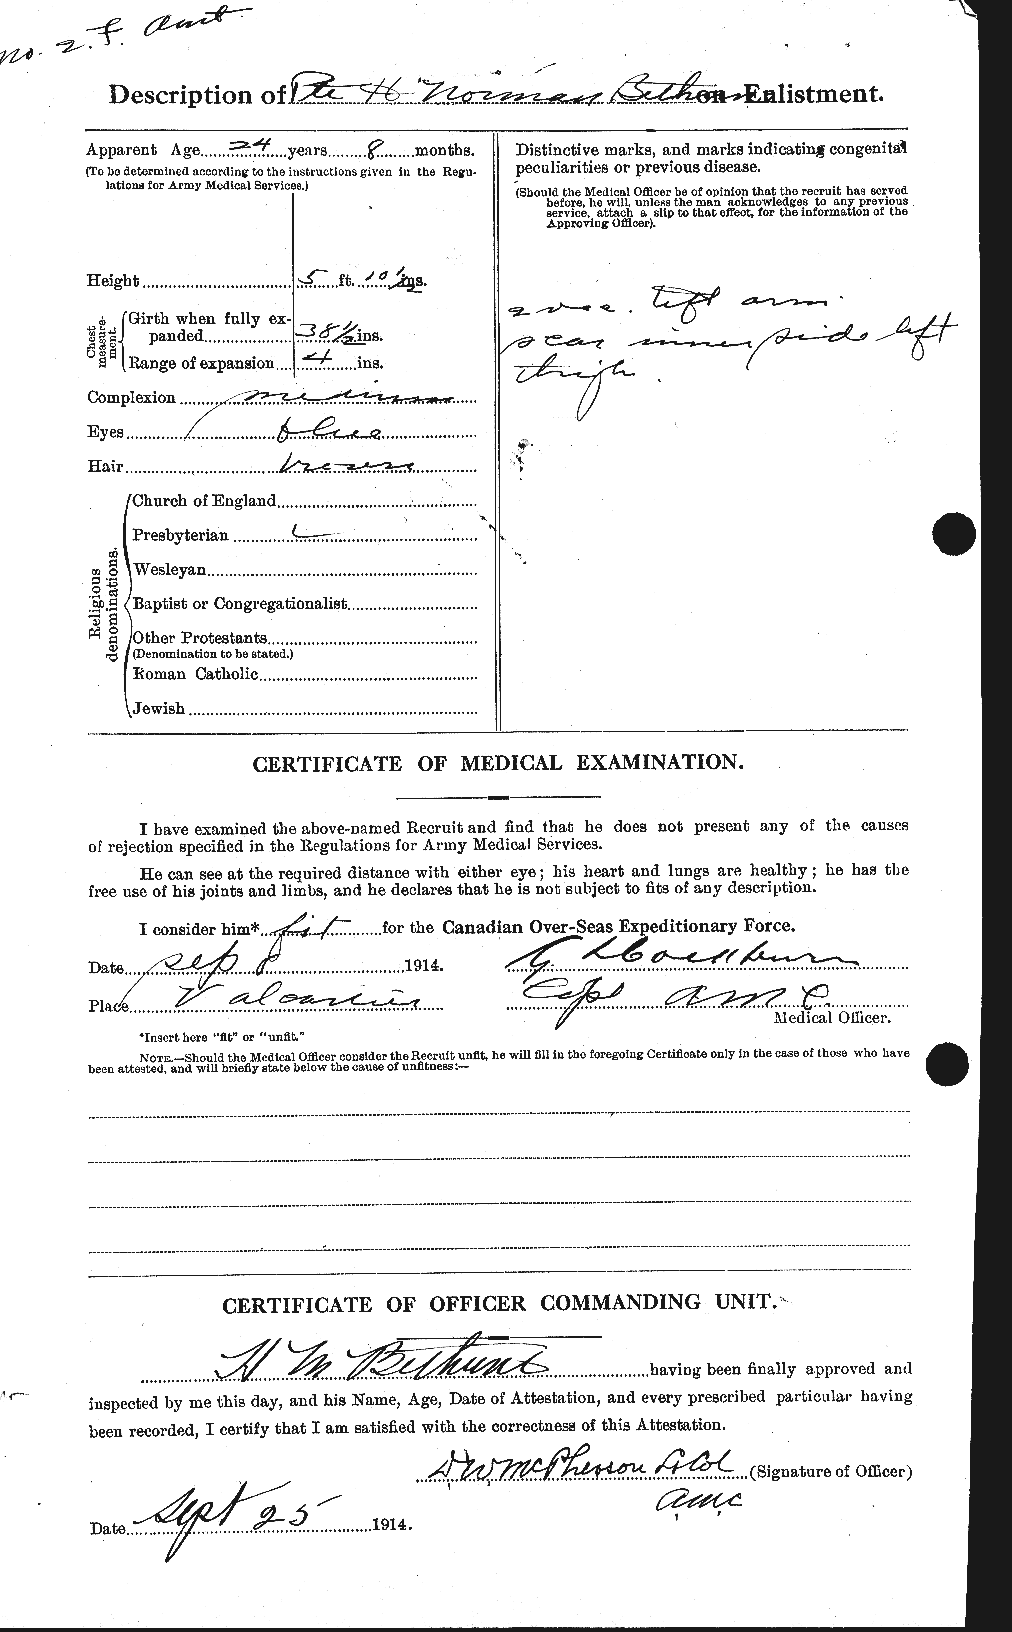 Attestation record: Henry Norman Bethune